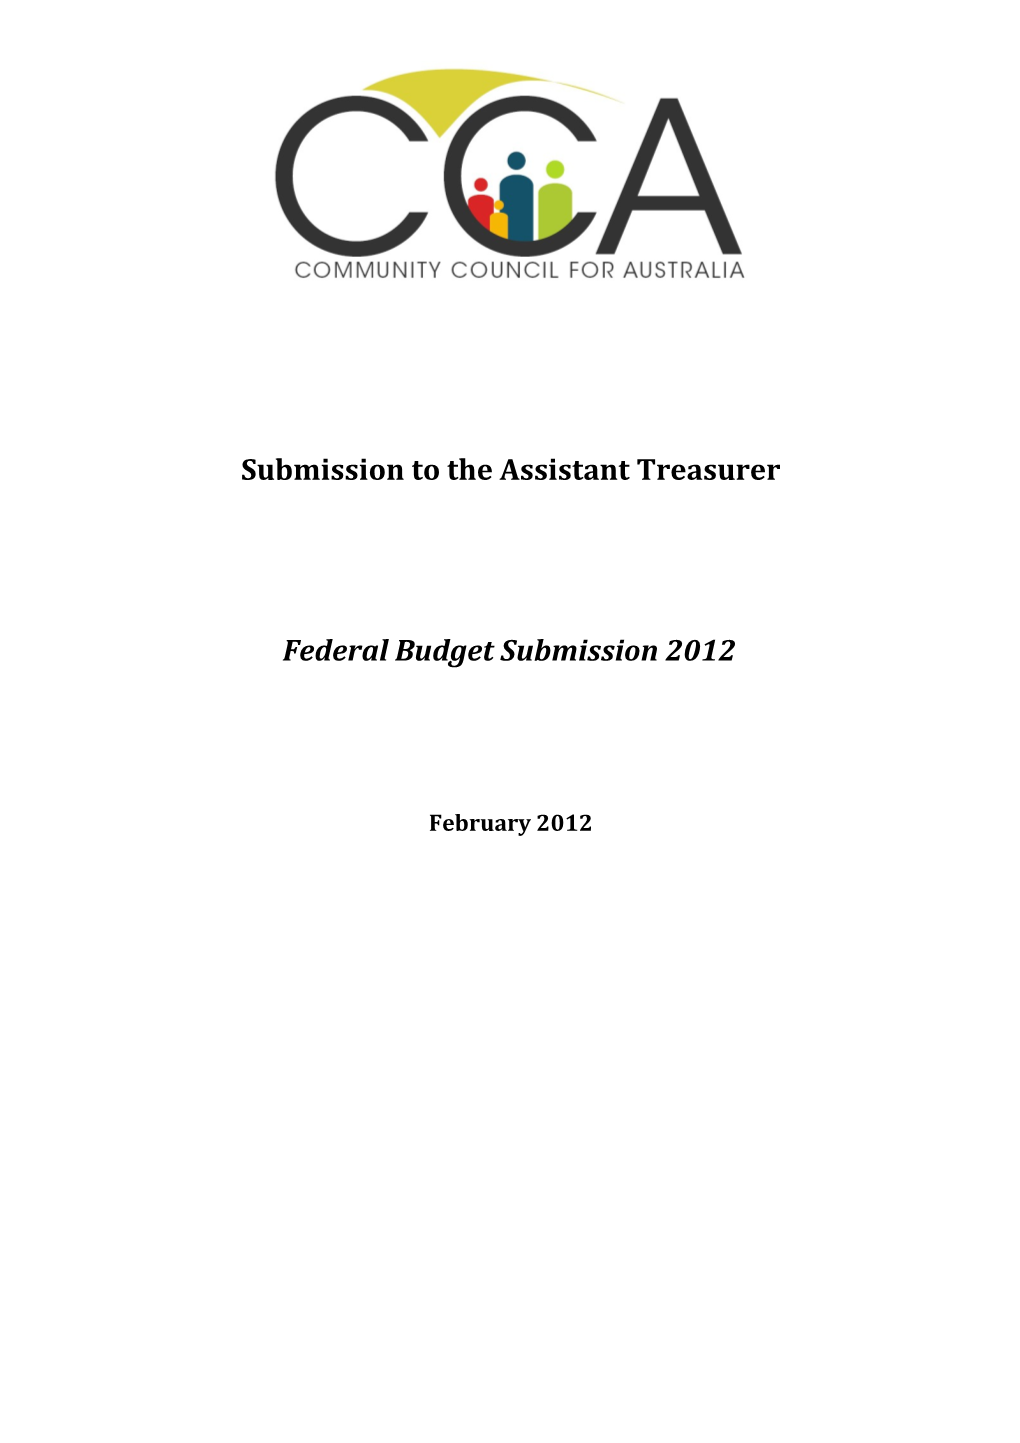 Community Council for Australia: Federal Budget Submission 2012